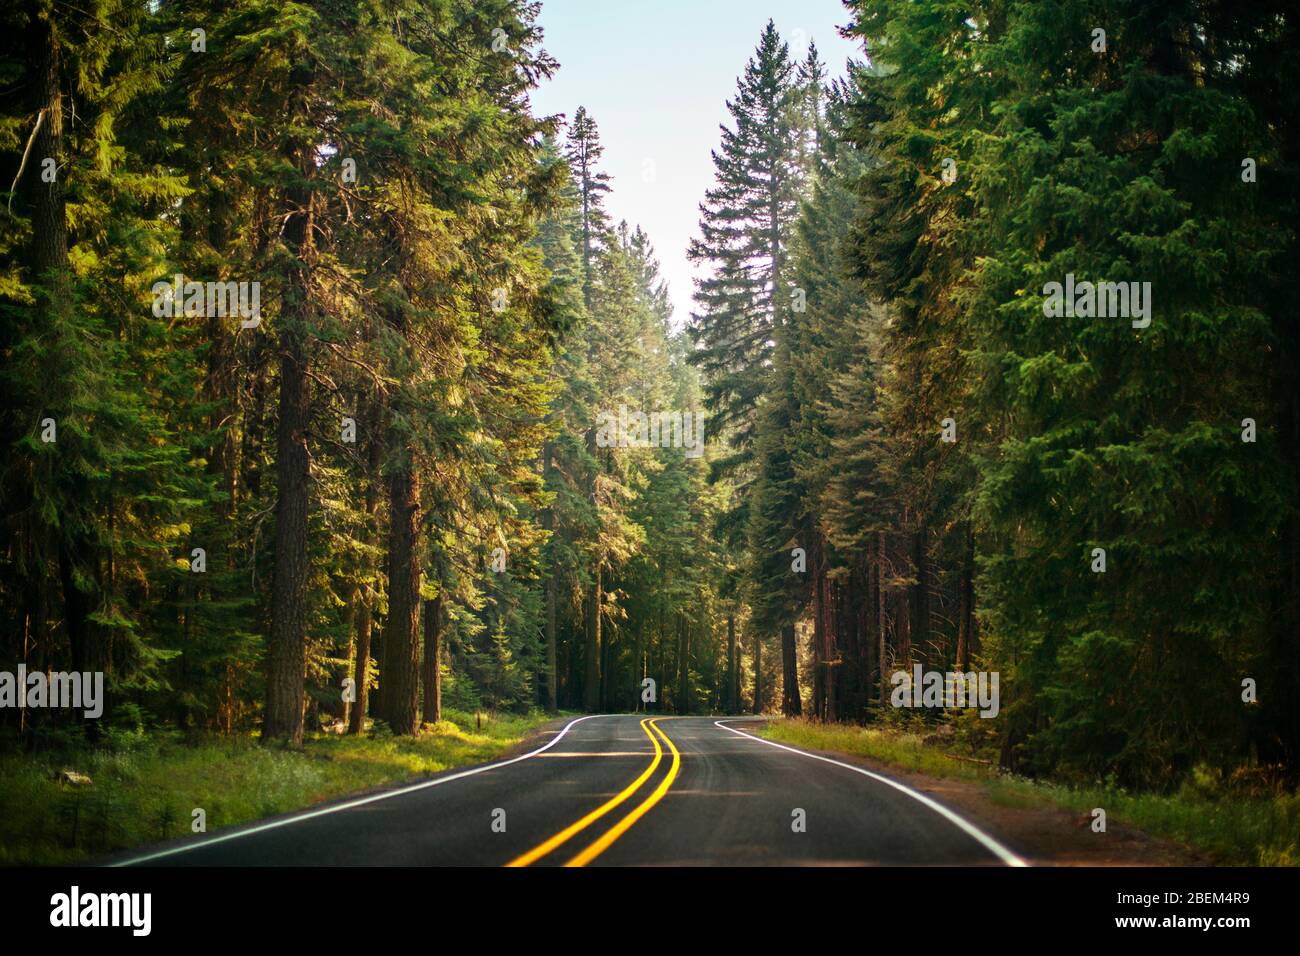 Country road surrounded by trees. Stock Photo